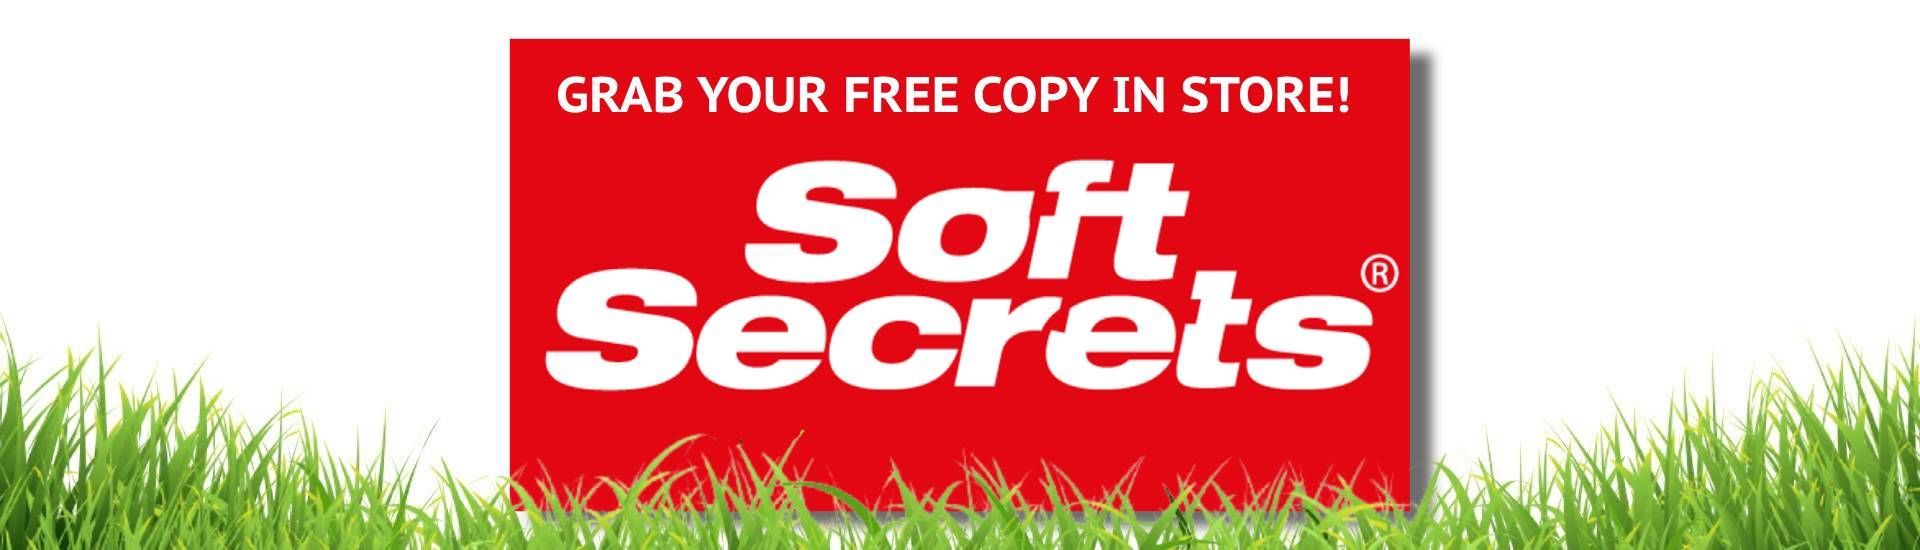 Soft Secrets - the free newspaper for hydroponic growers and those who use the produce